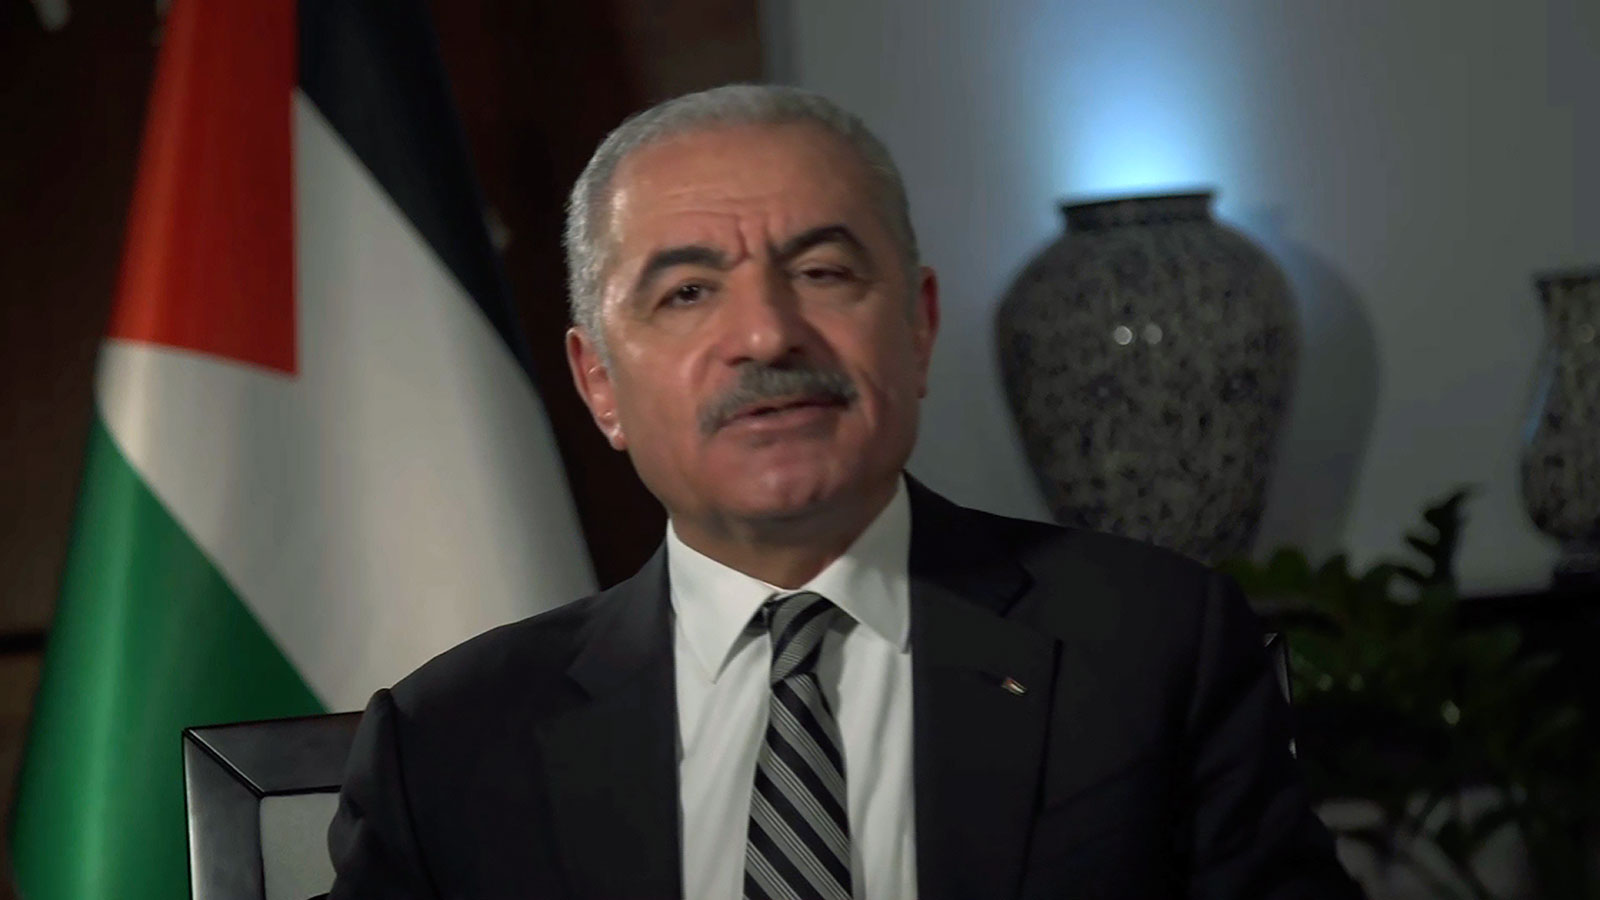 Caretaker Prime Minister of the Palestinian Authority Mohammad Shtayyeh speaks with CNN's Christiane Amanpour on Tuesday.